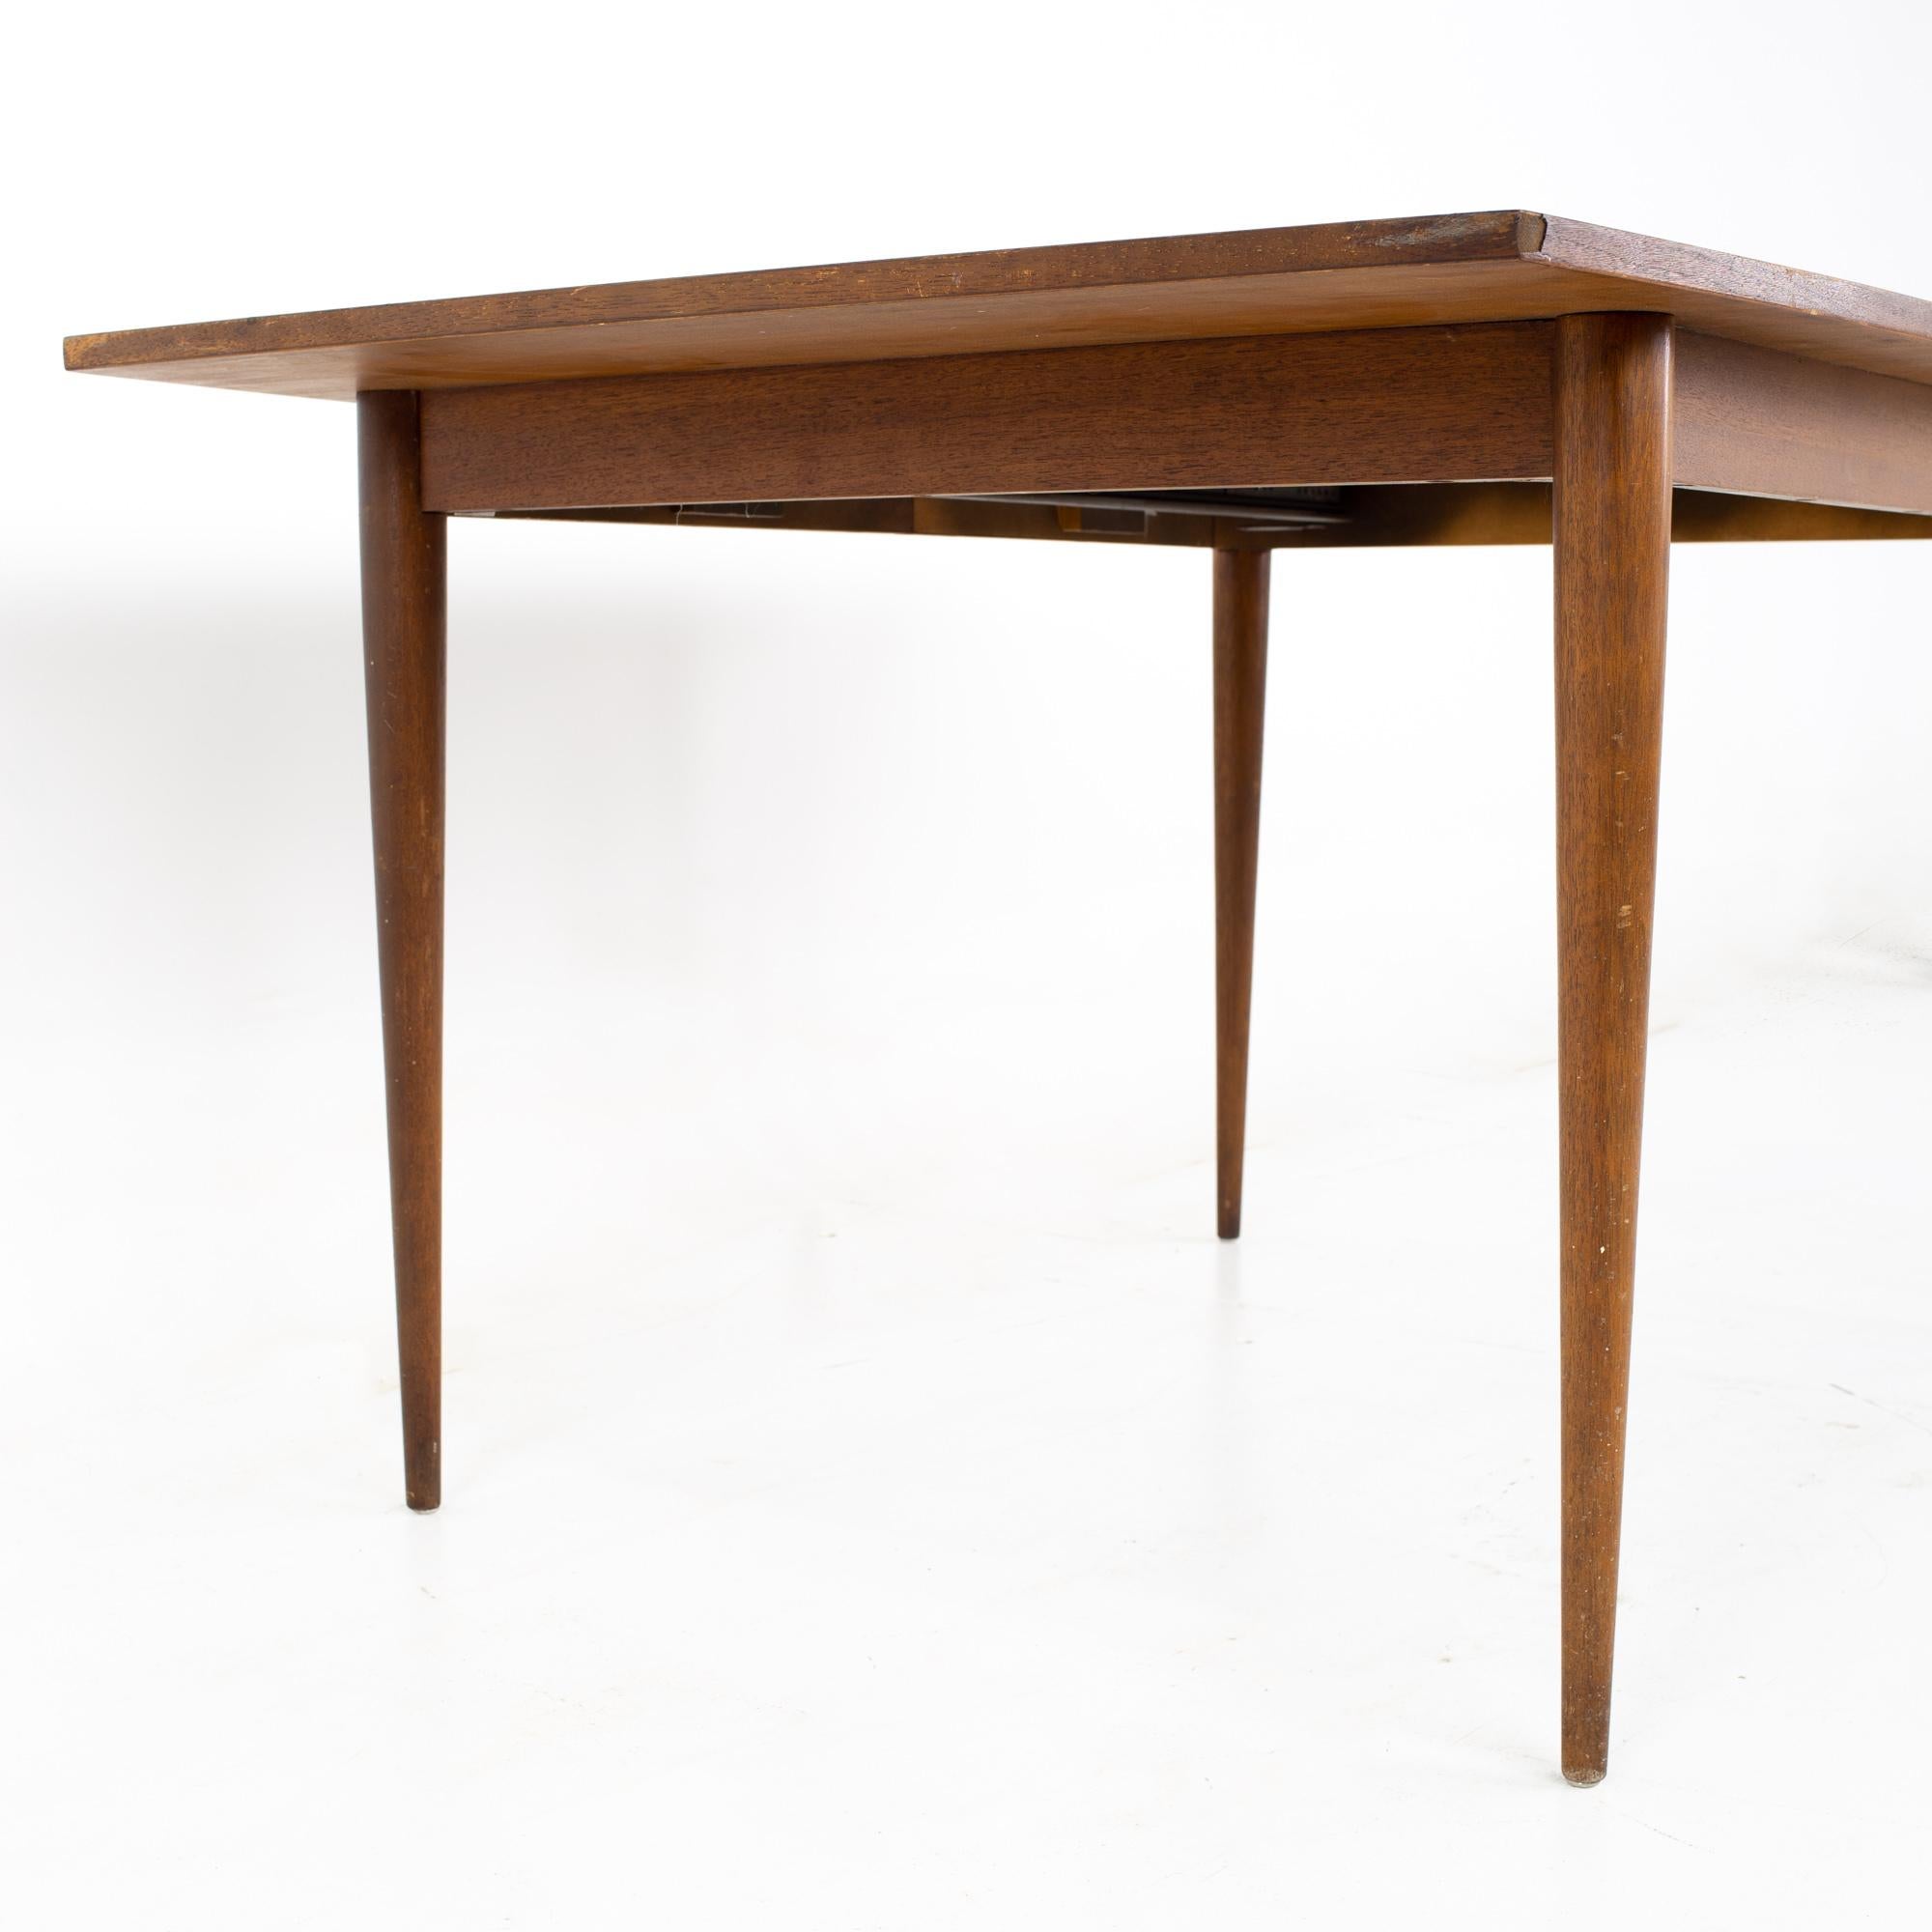 American Broyhill Brasilia Mid Century Dining Table, No Leaf For Sale